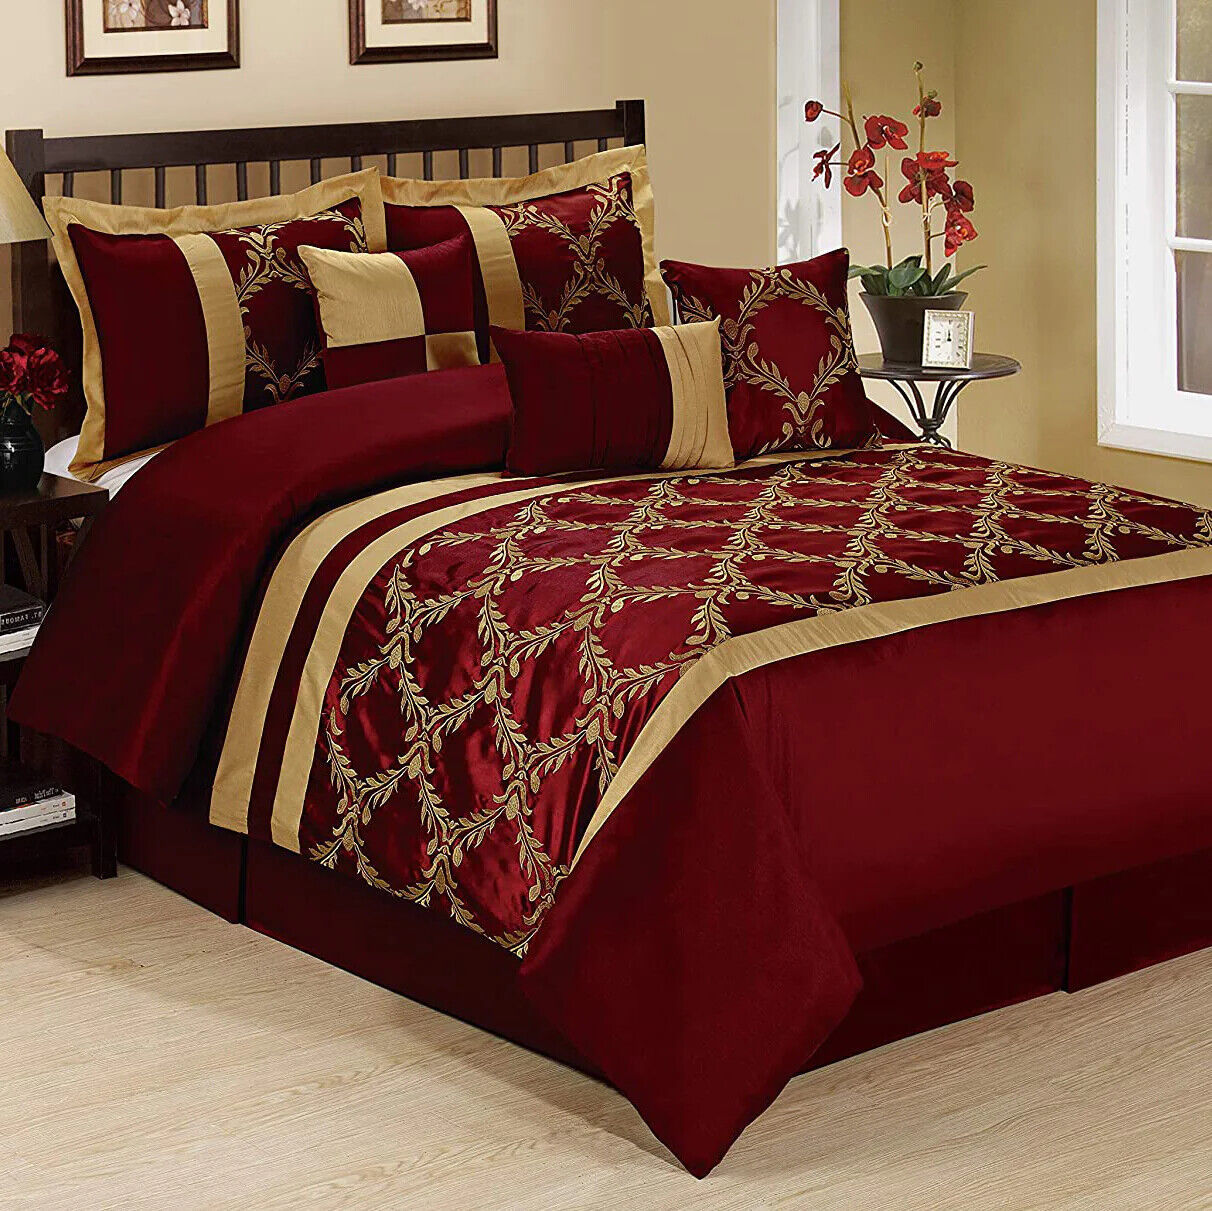 Primary image for HIG 7PC Comforter Set Bed in a Bag Taffeta Fabric Embroidered Bed for Room Decor